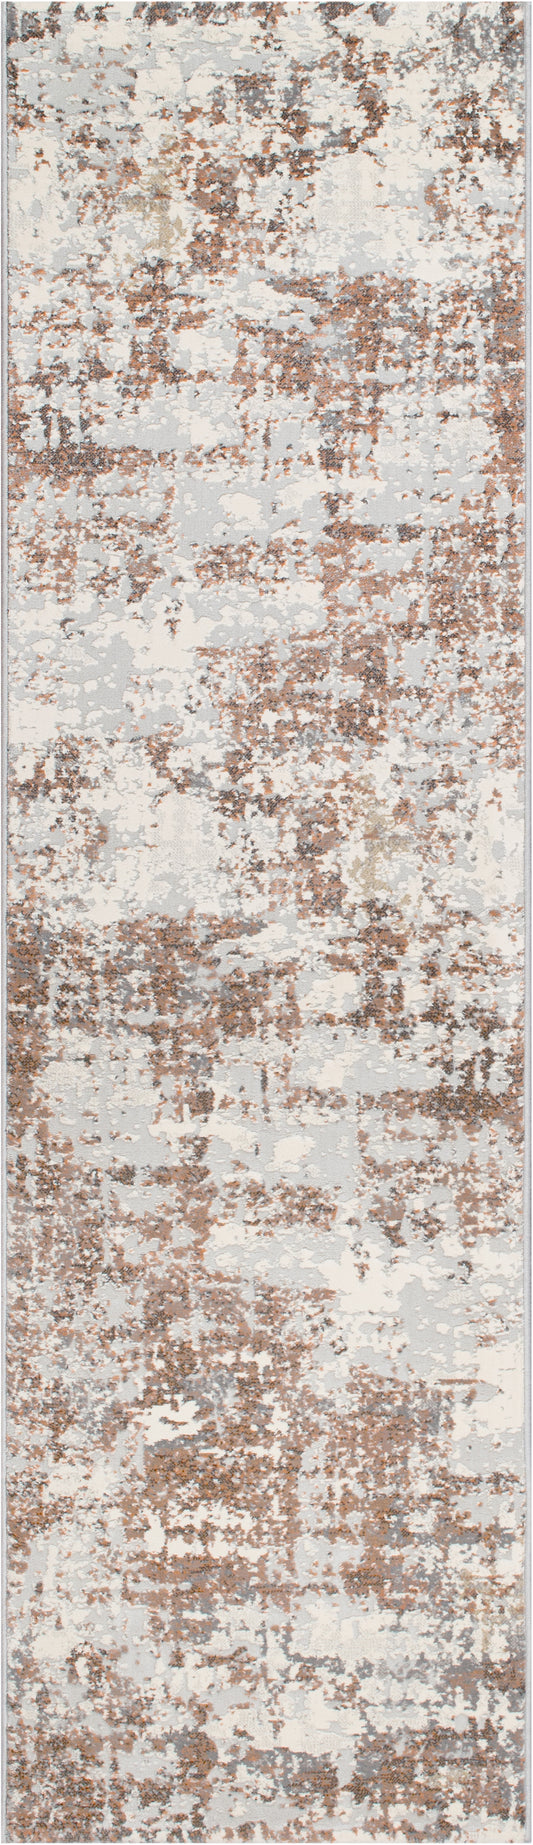 Couture 52016 Finished Runner Ivory/Copper